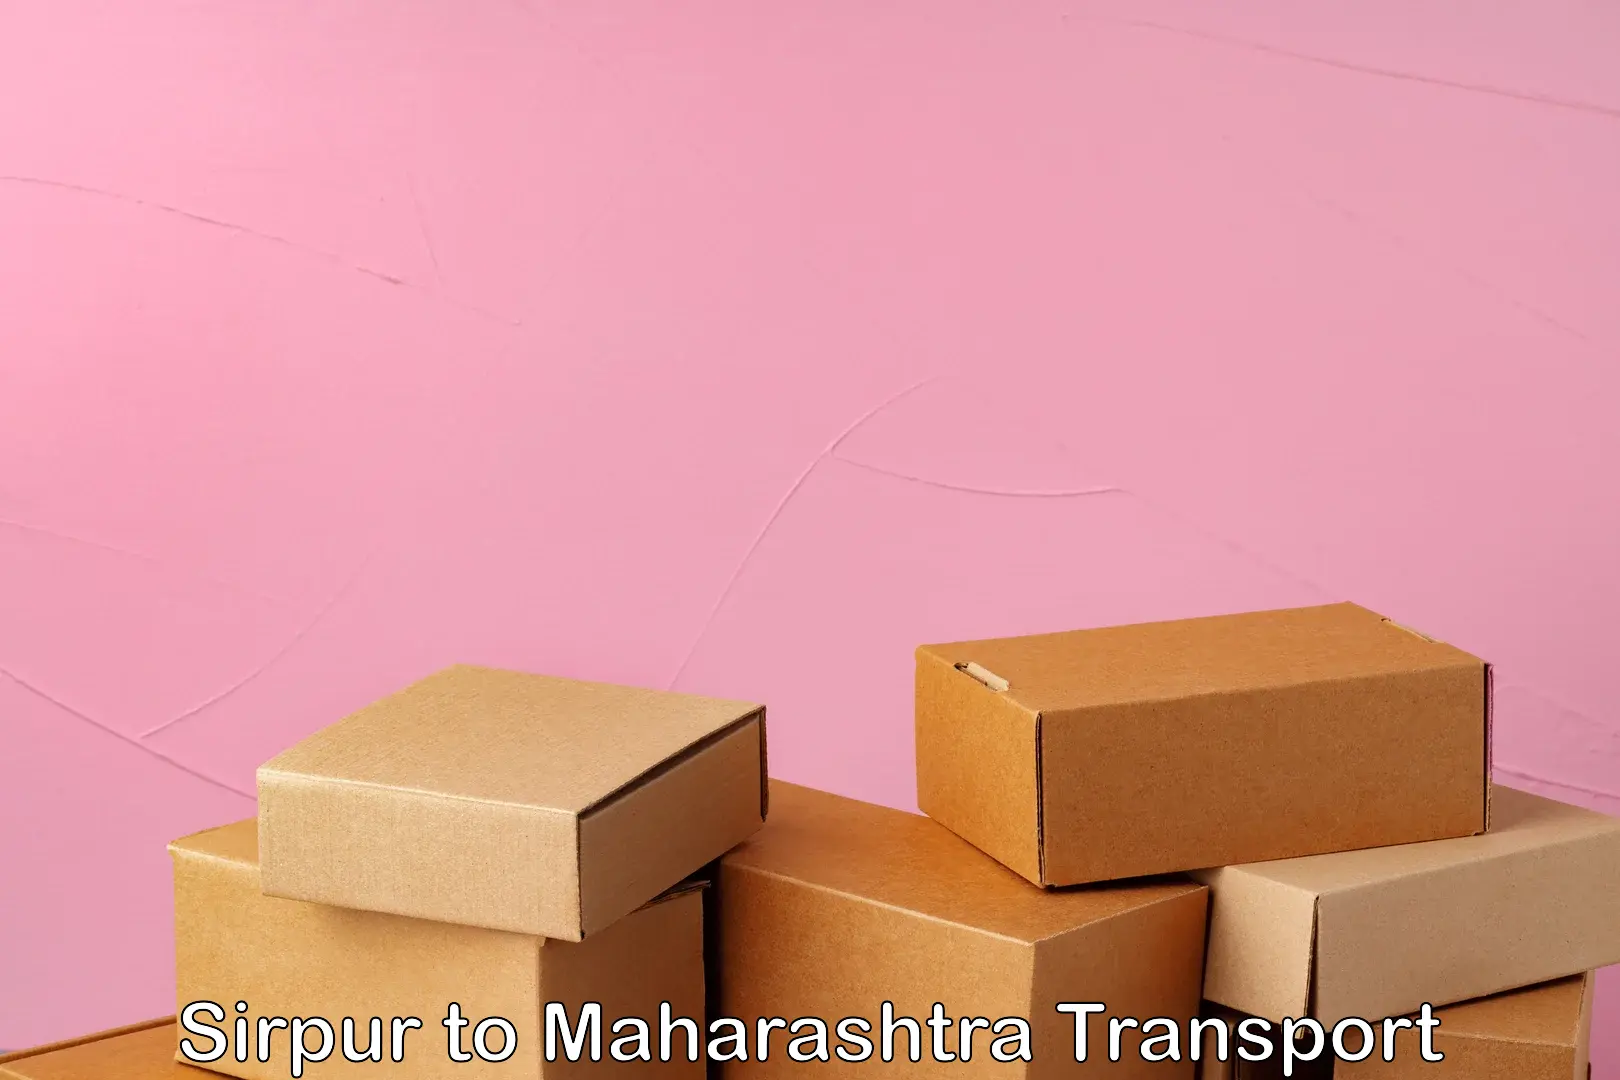 Air freight transport services Sirpur to Maharashtra